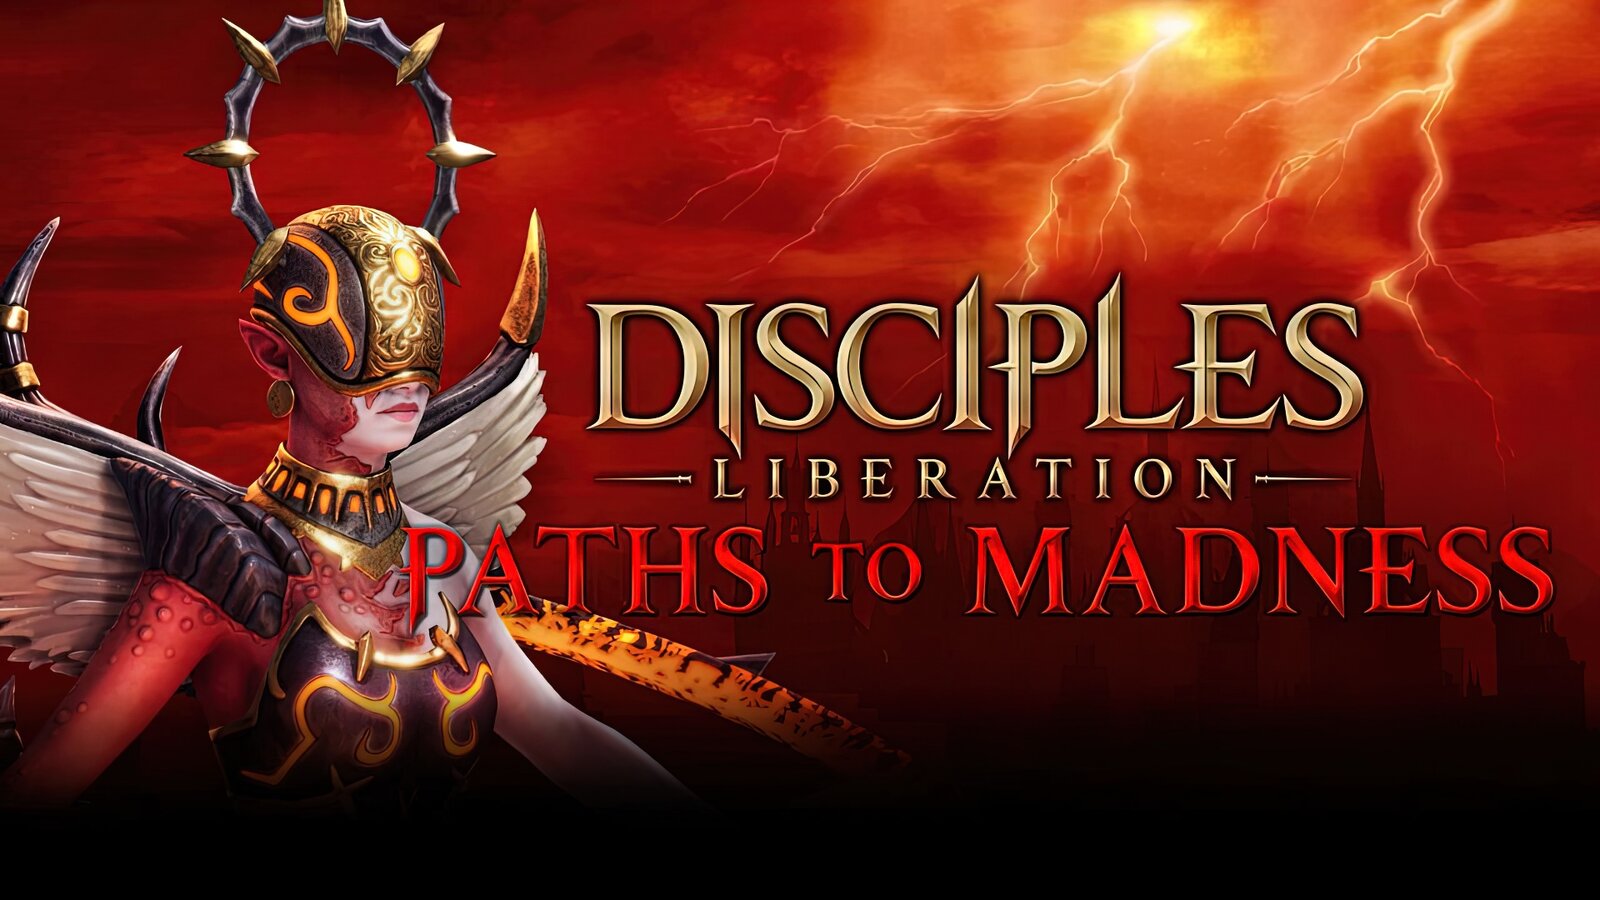 Disciples: Liberation - Paths to Madness